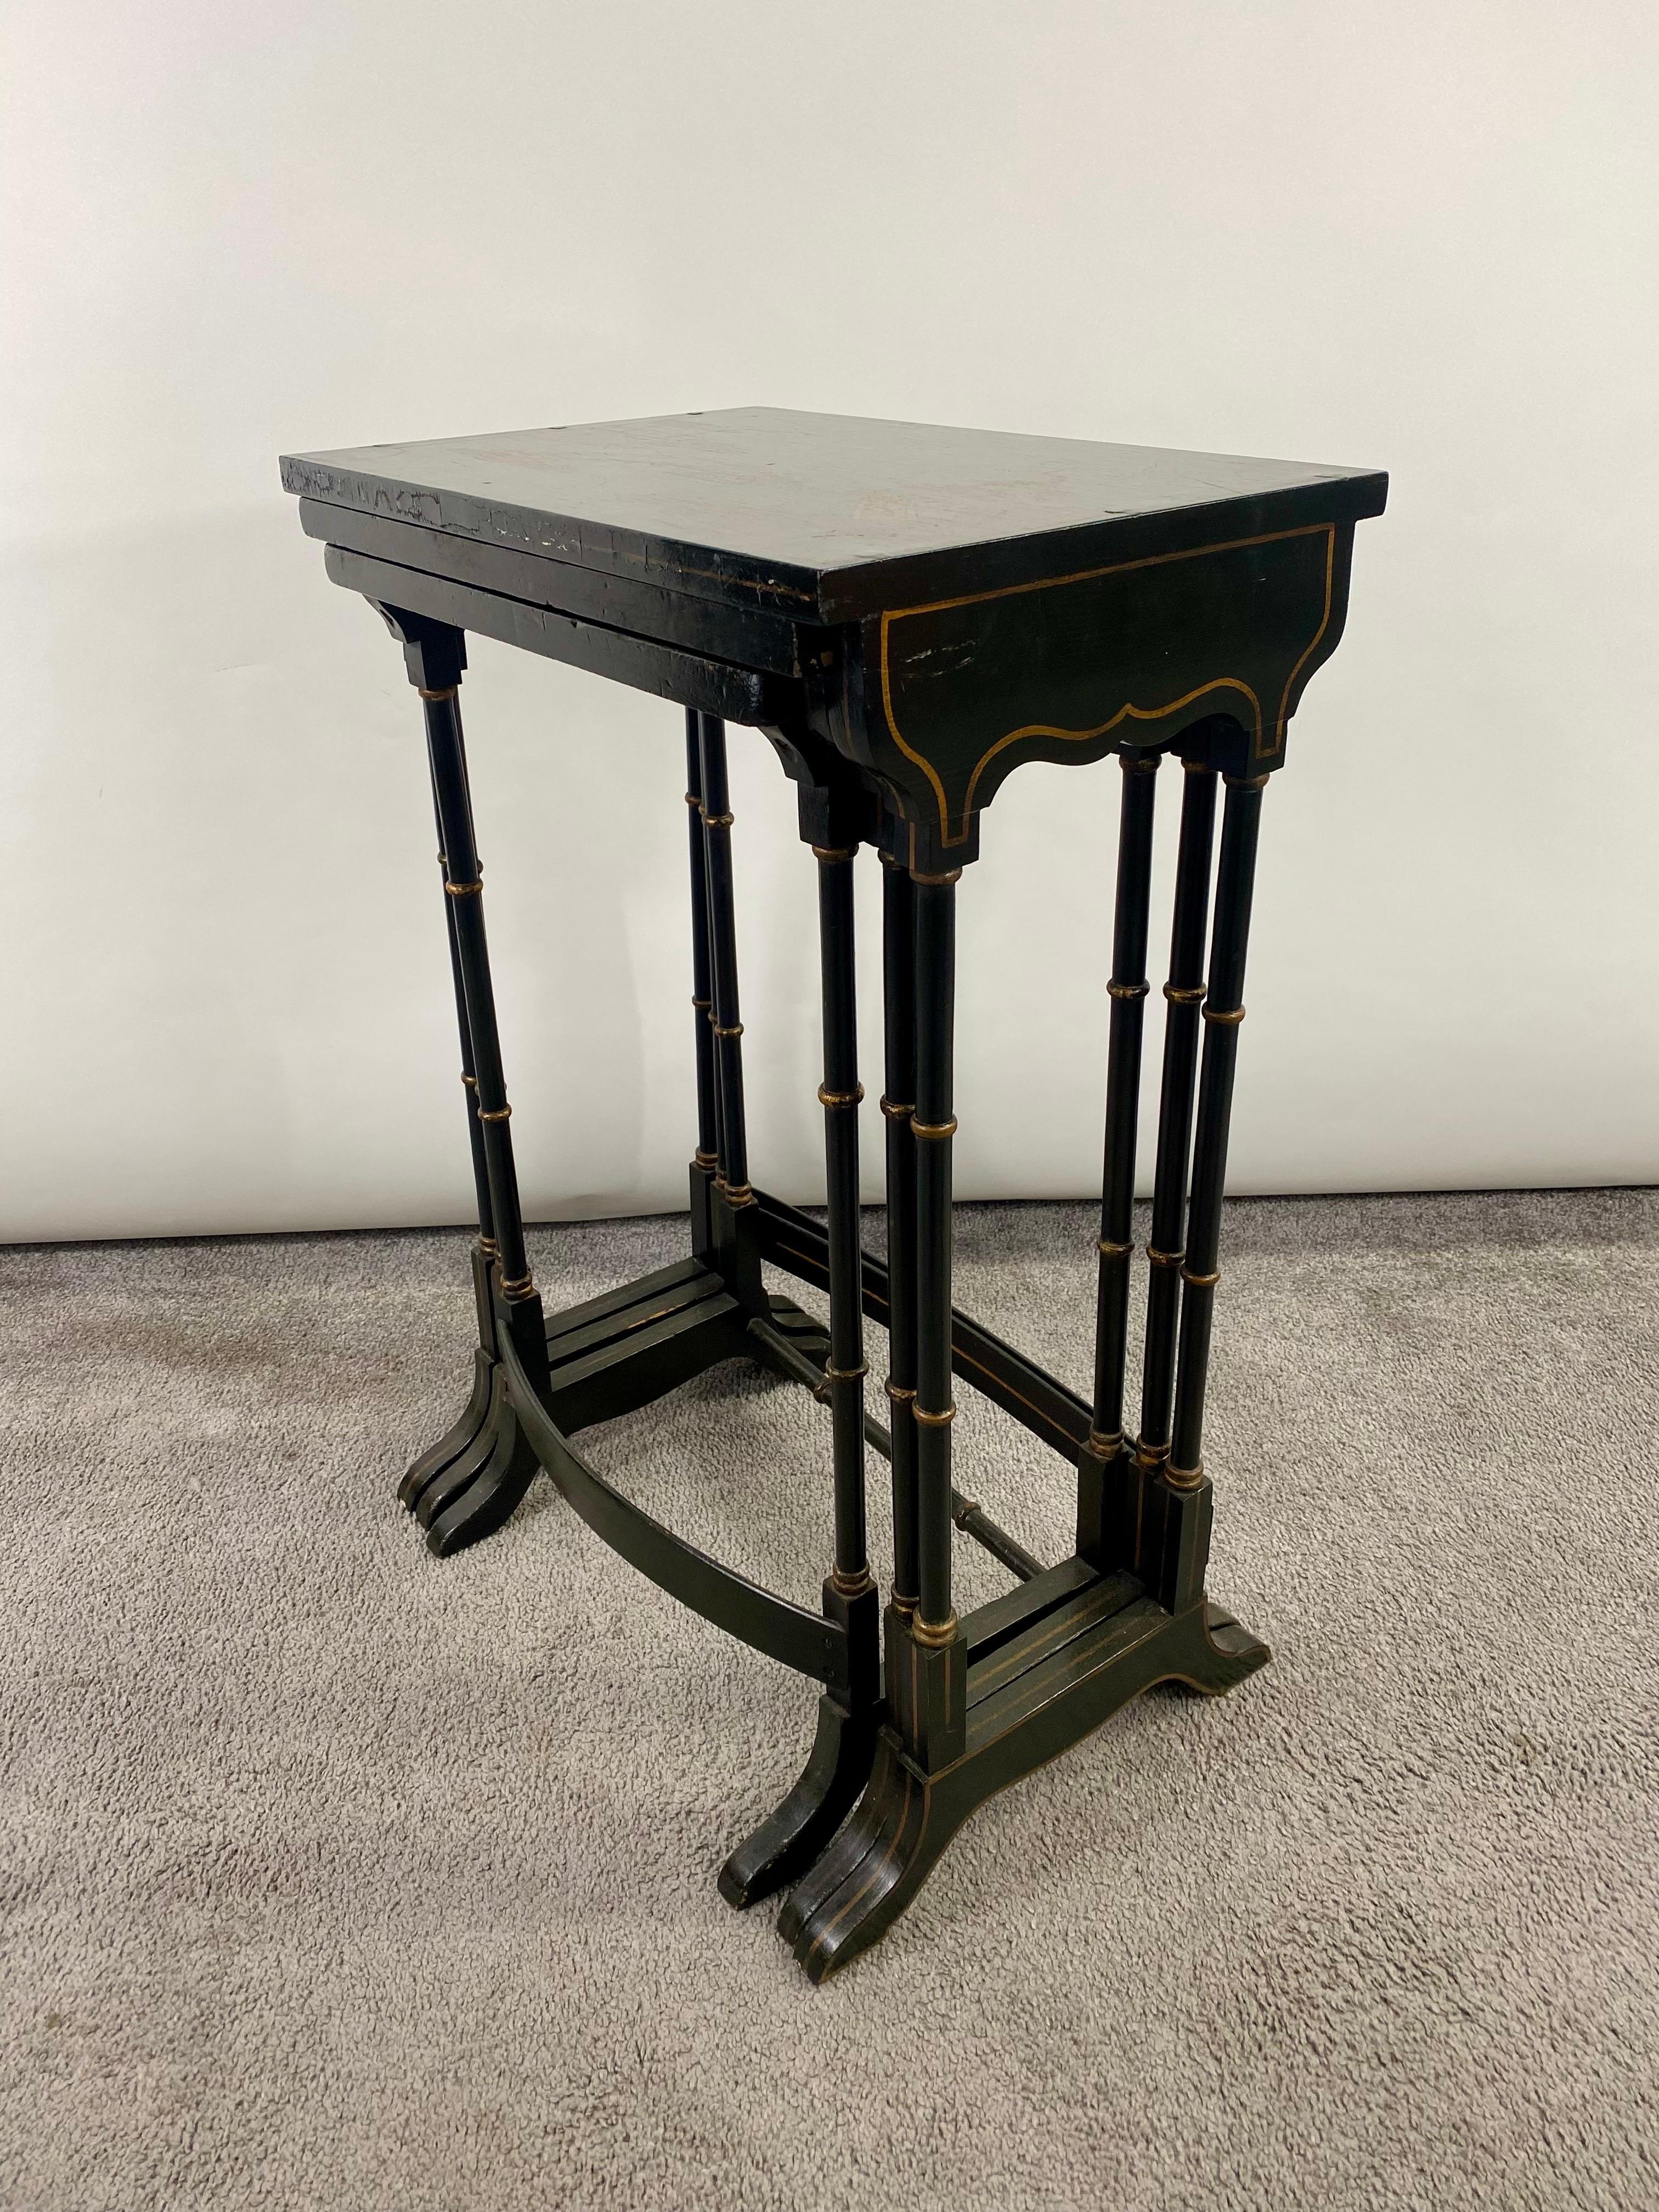 Early 20th Century Chinoiserie Black Lacquered Japanned Nesting Tables, Set of 3 For Sale 6